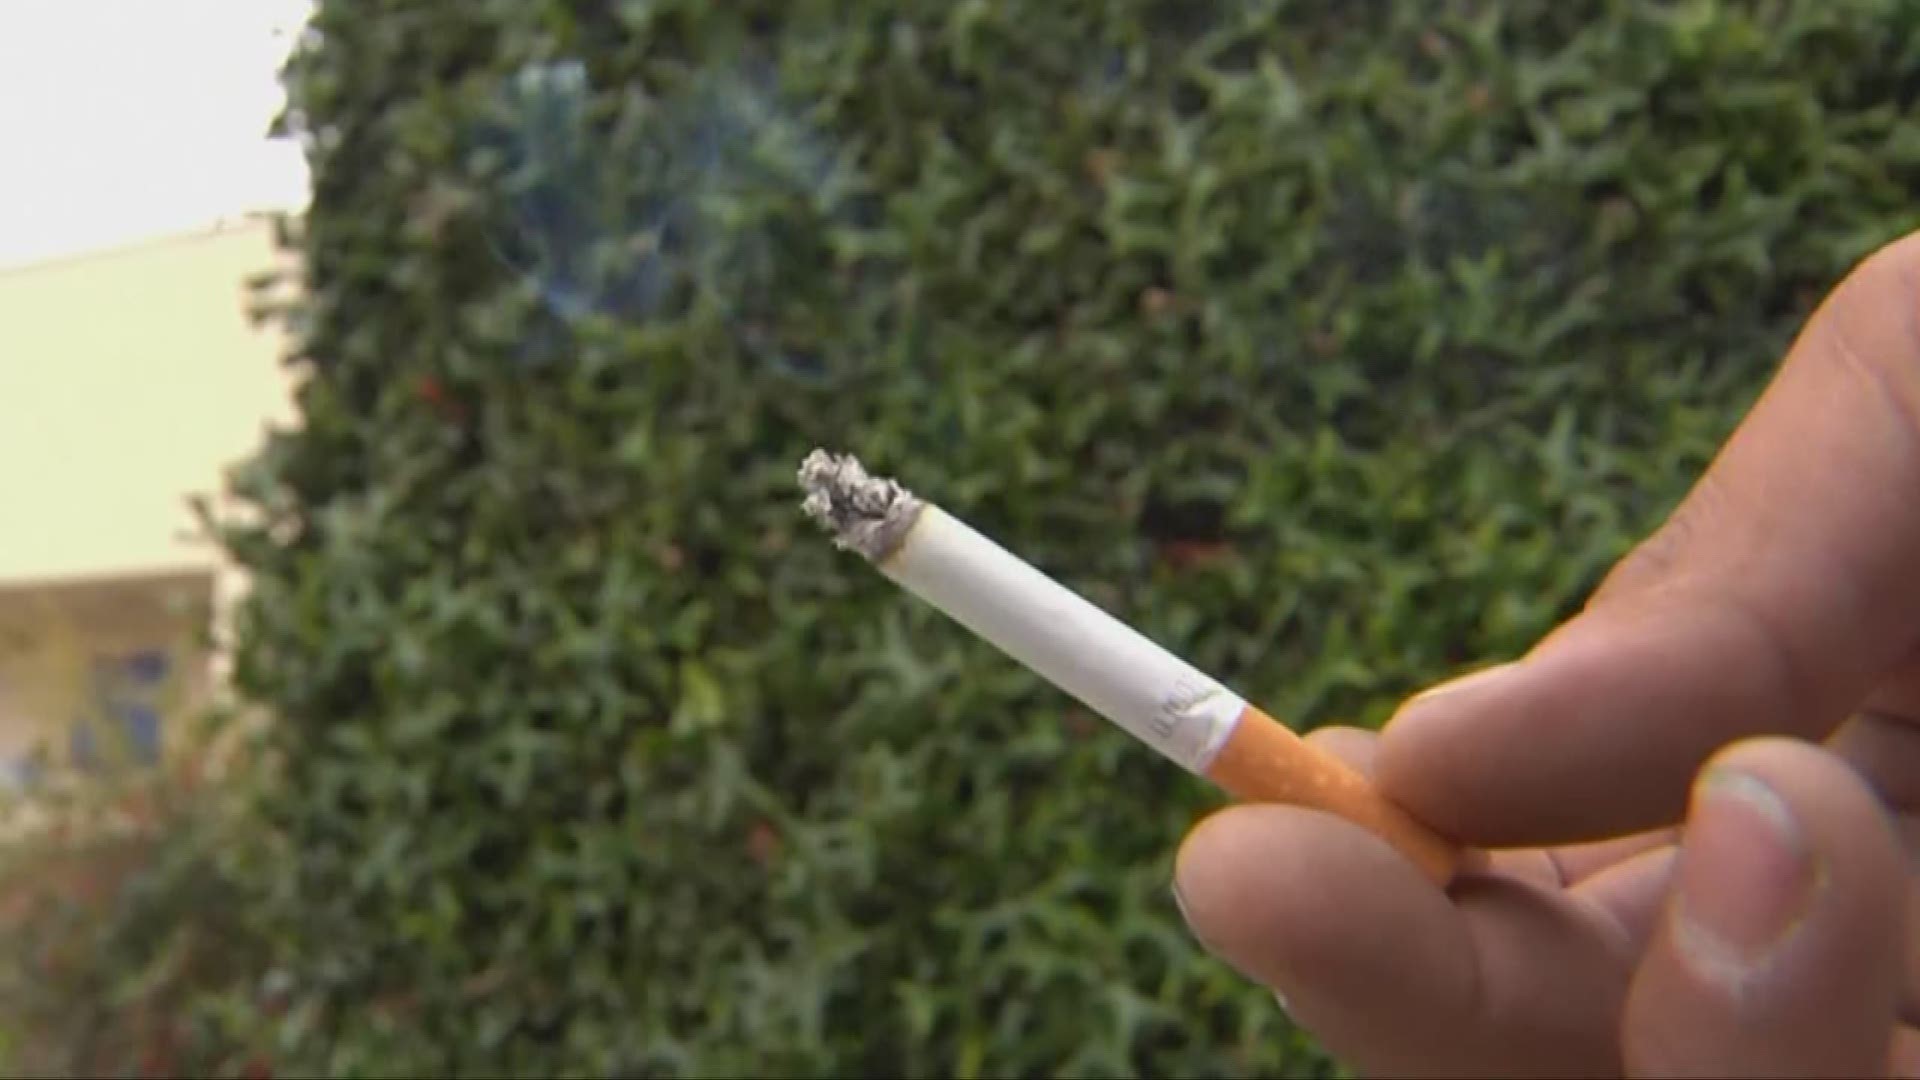 How will public housing smoking ban be enforced?